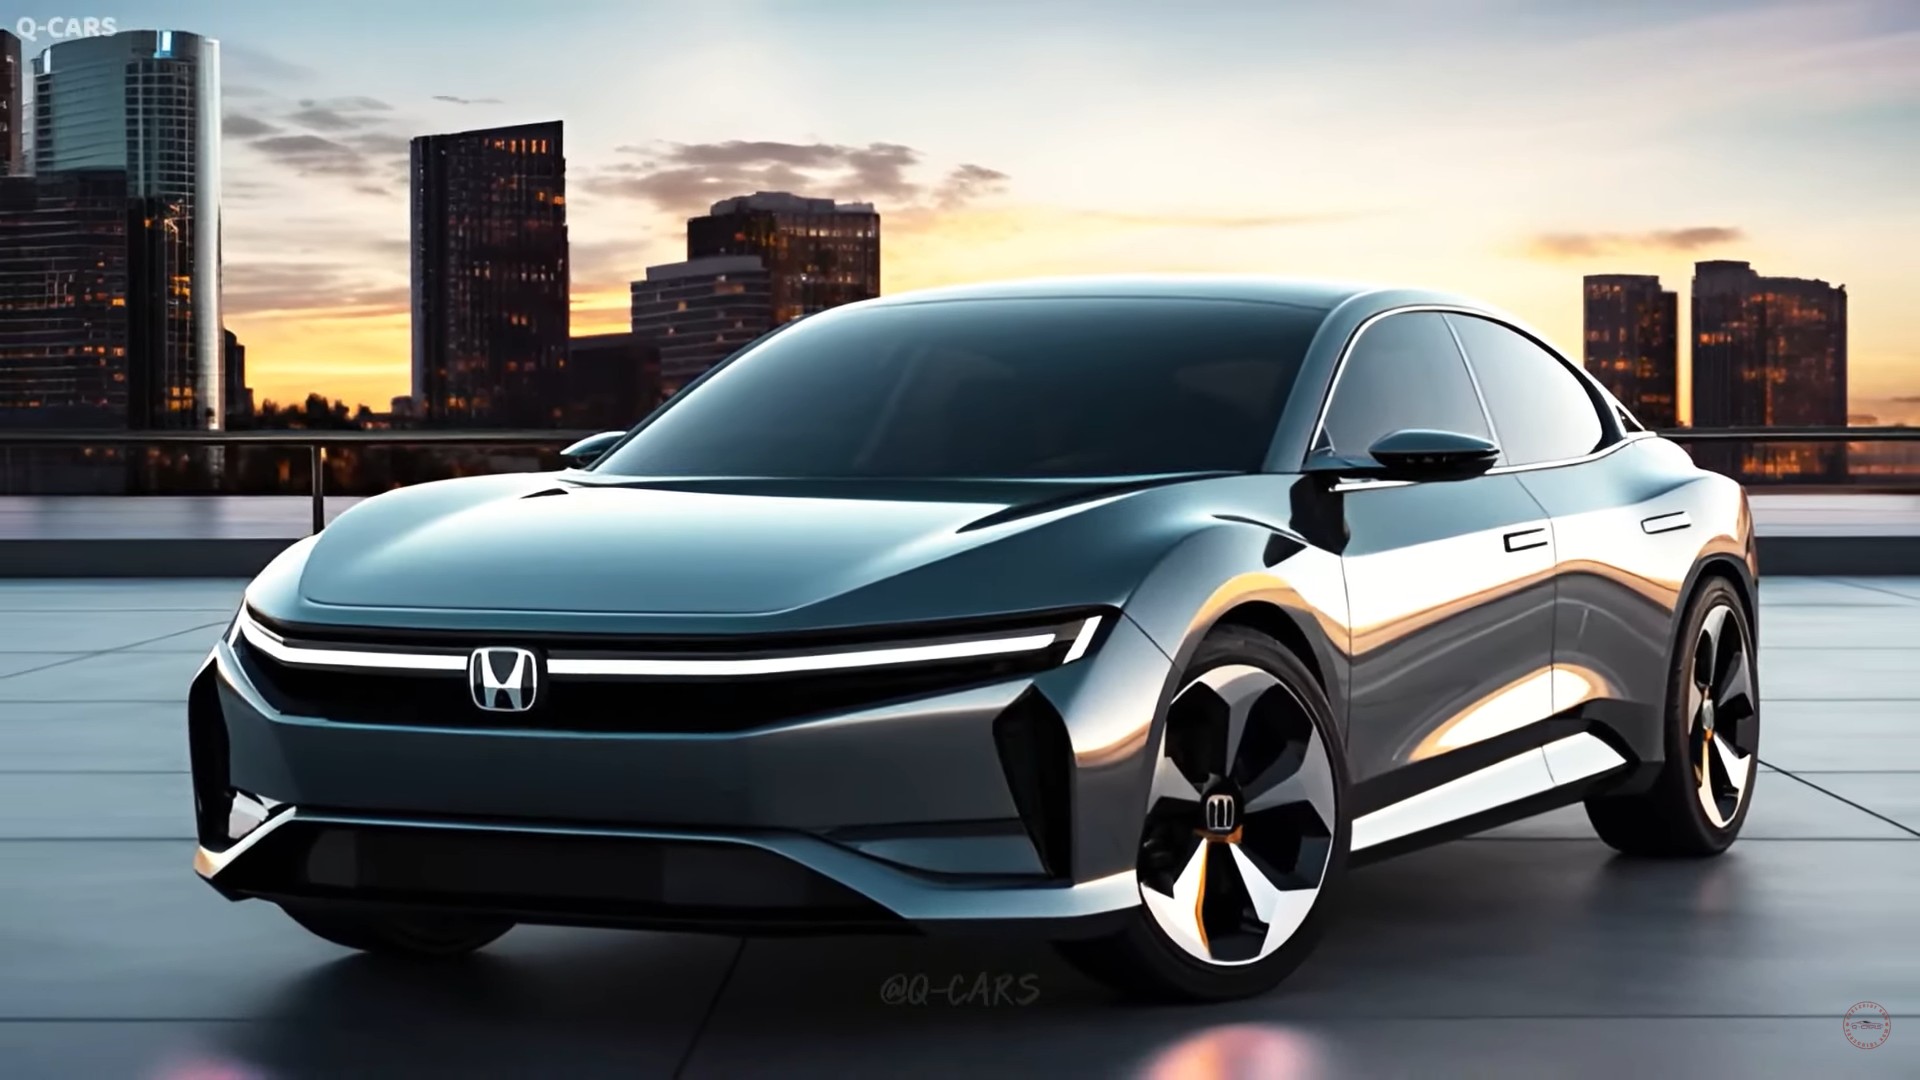 Redesigned 2025 Honda Accord Aims to Surprise With Significant Virtual  Design Changes - autoevolution